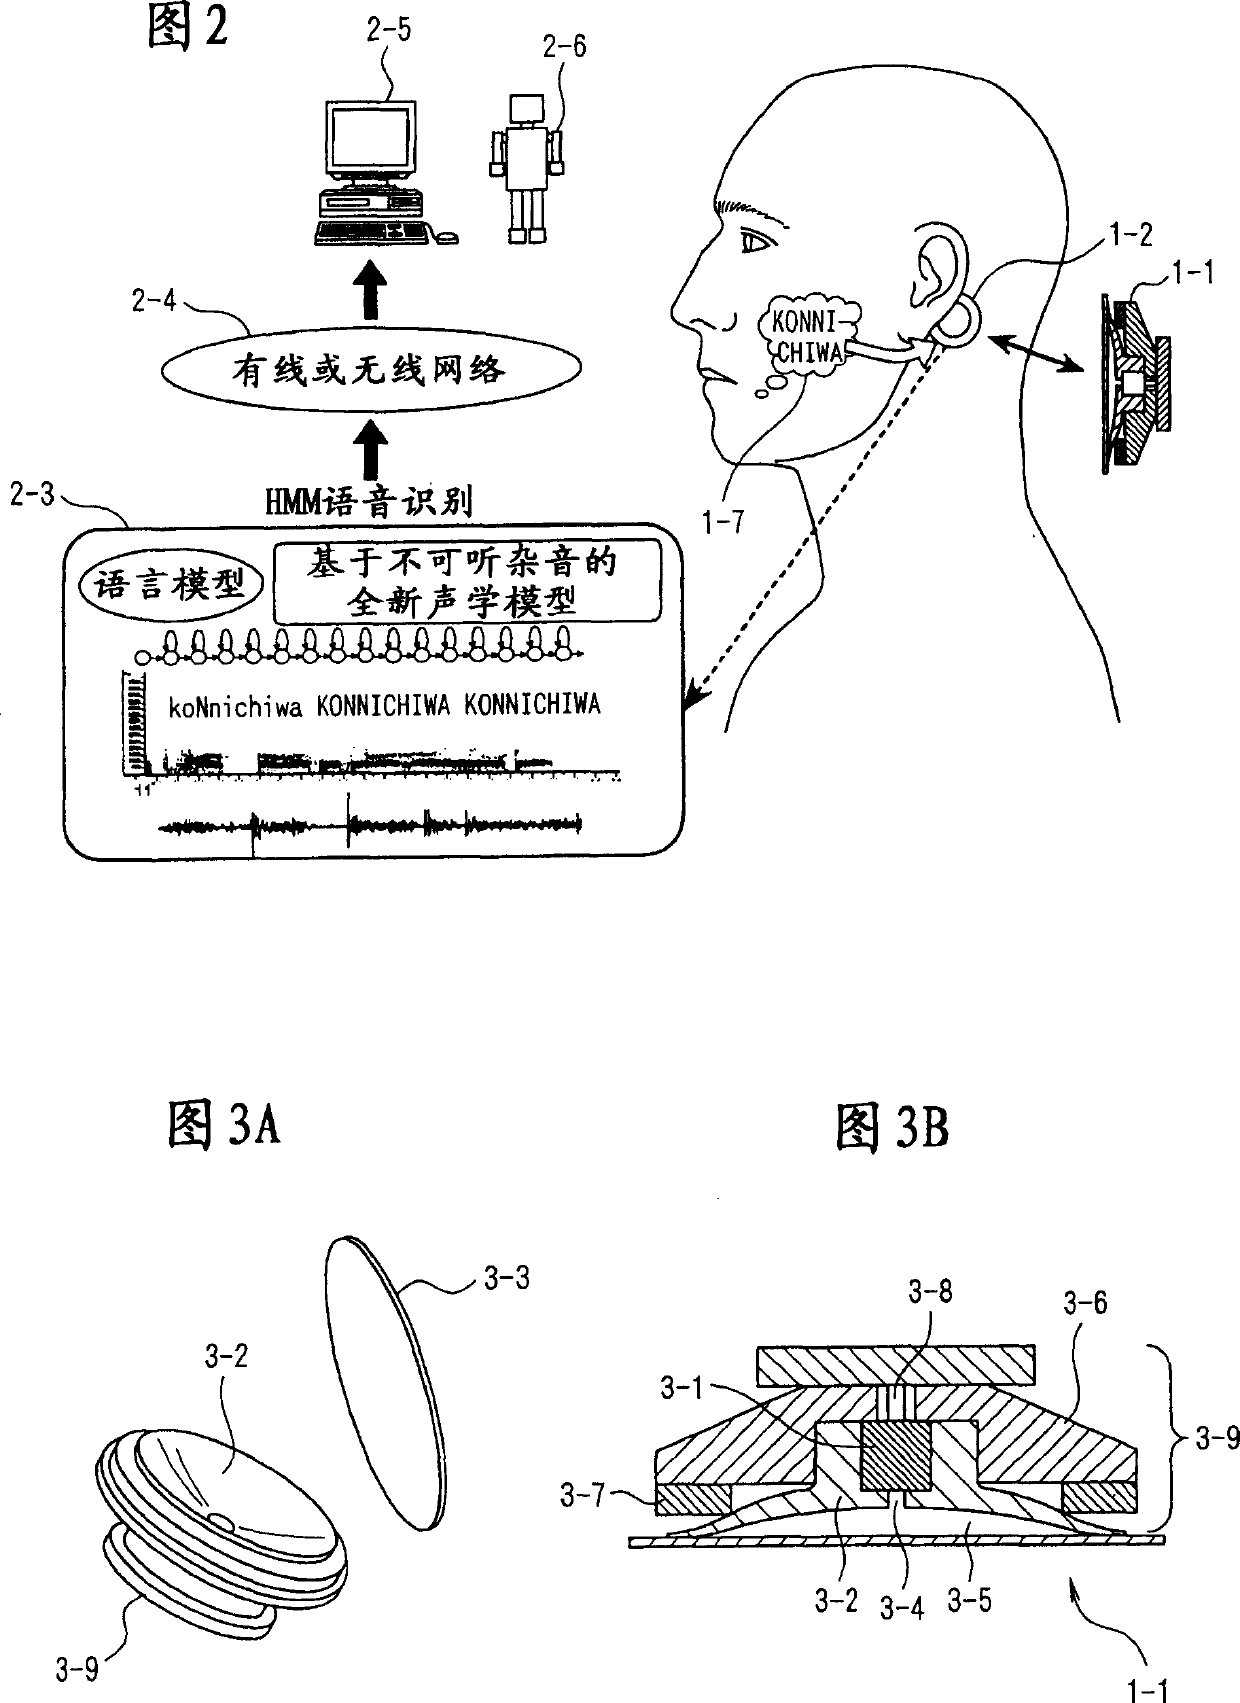 Microphone and communication interface system